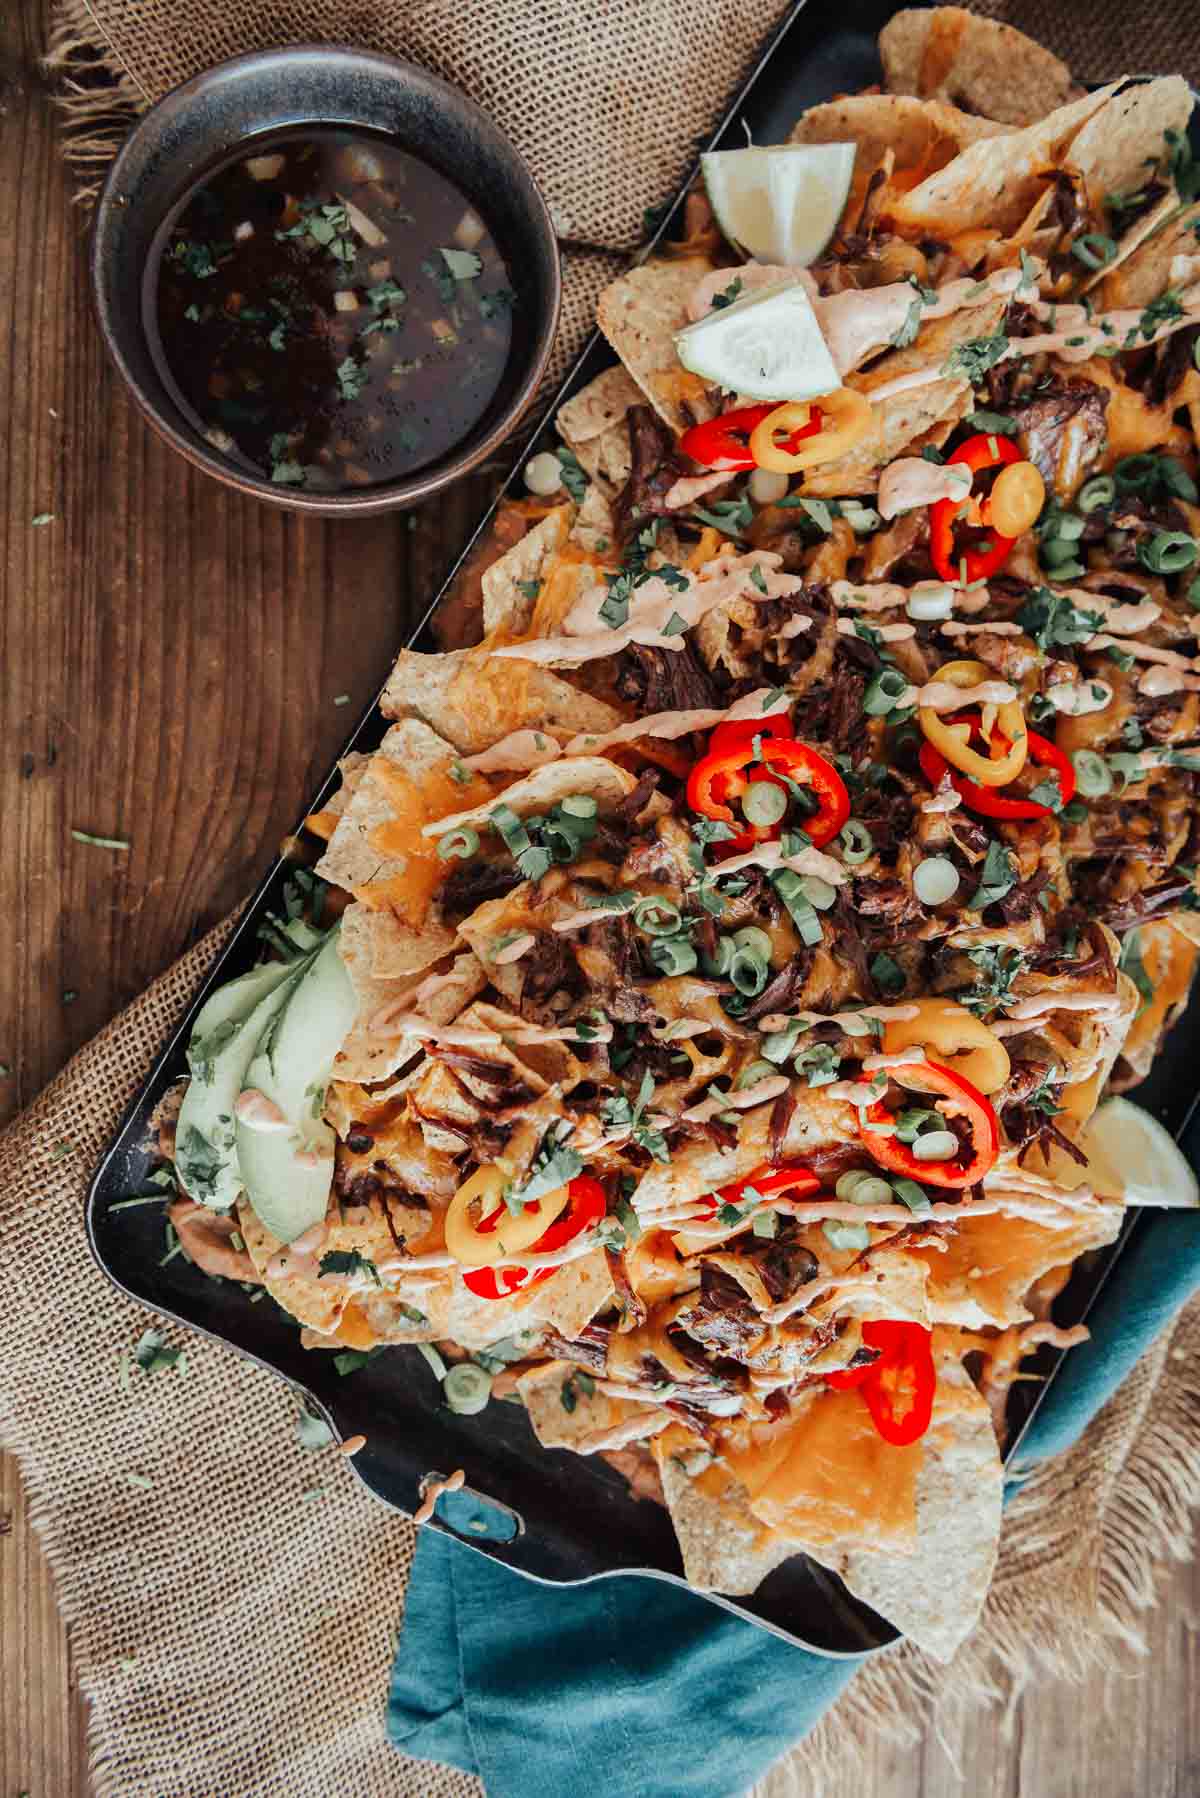 A tray of birria nachos on a wooden table.